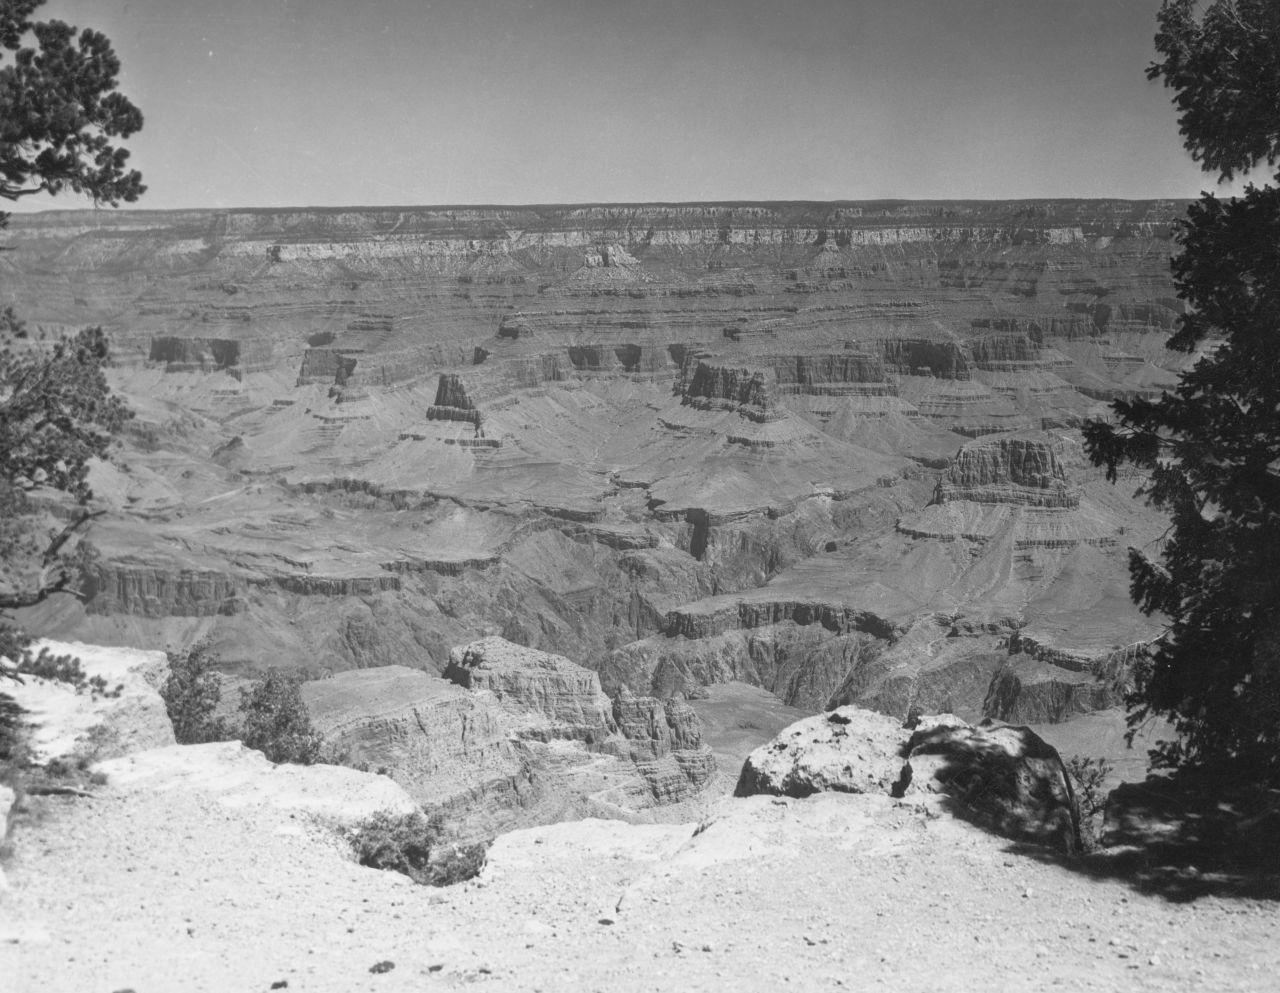 In 1956, a TWA jet crashed into a United Airlines flight above the Grand Canyon. The incident highlighted the need for better communication between planes. A few years later, the Federal Aviation Administration (FAA) was formed to set guidelines for aviation in the United States.